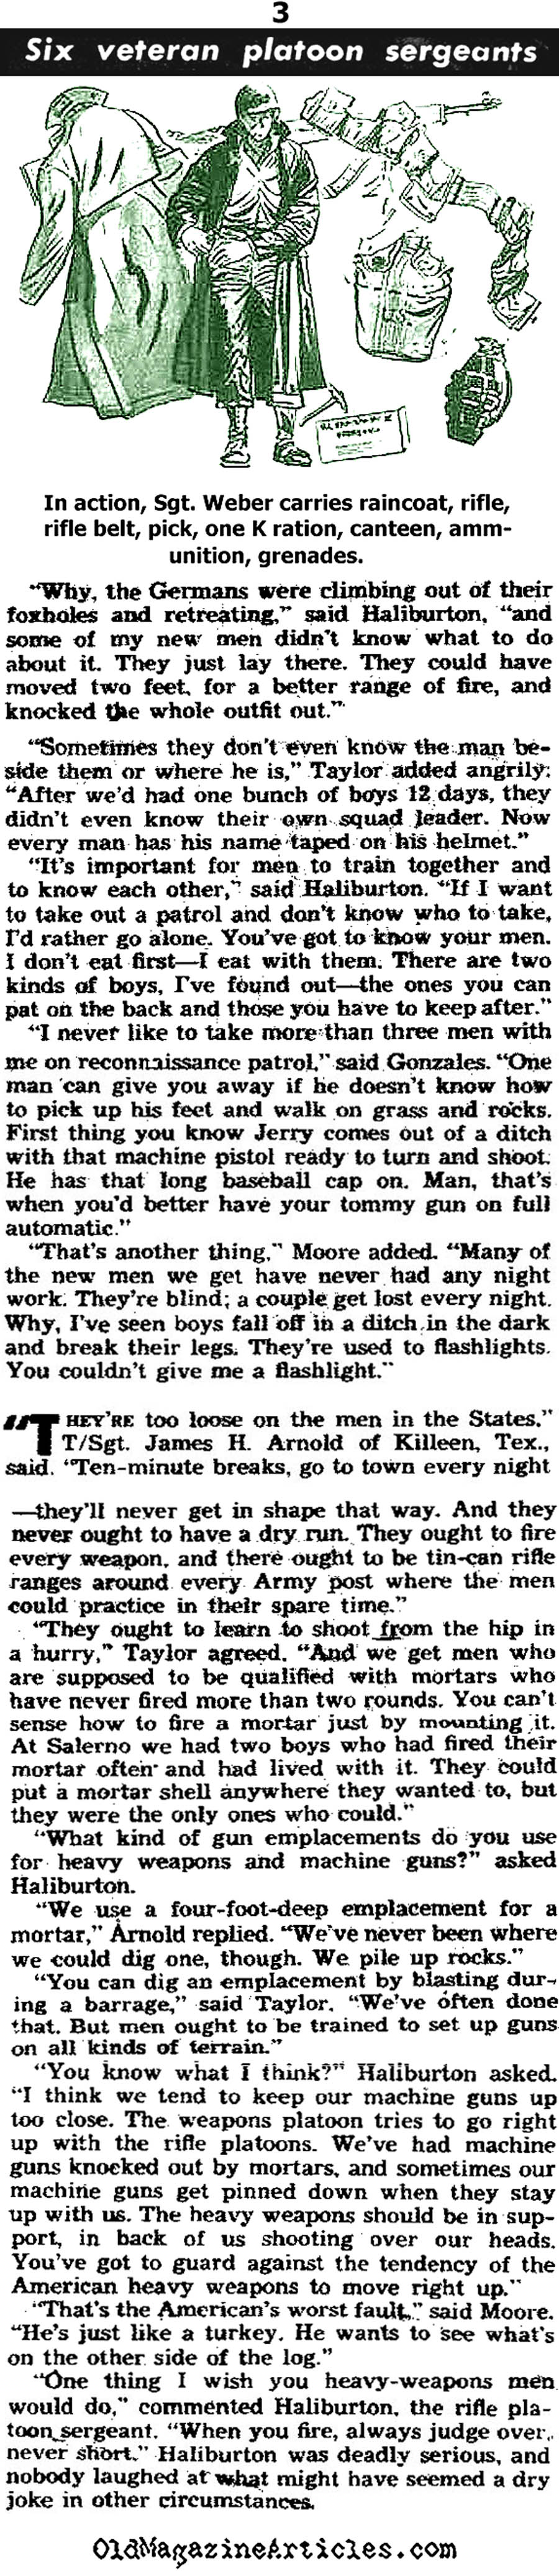 Front-Line Sergeants Talk Combat and Rant About Replacements  (Yank Magazine, 1945)